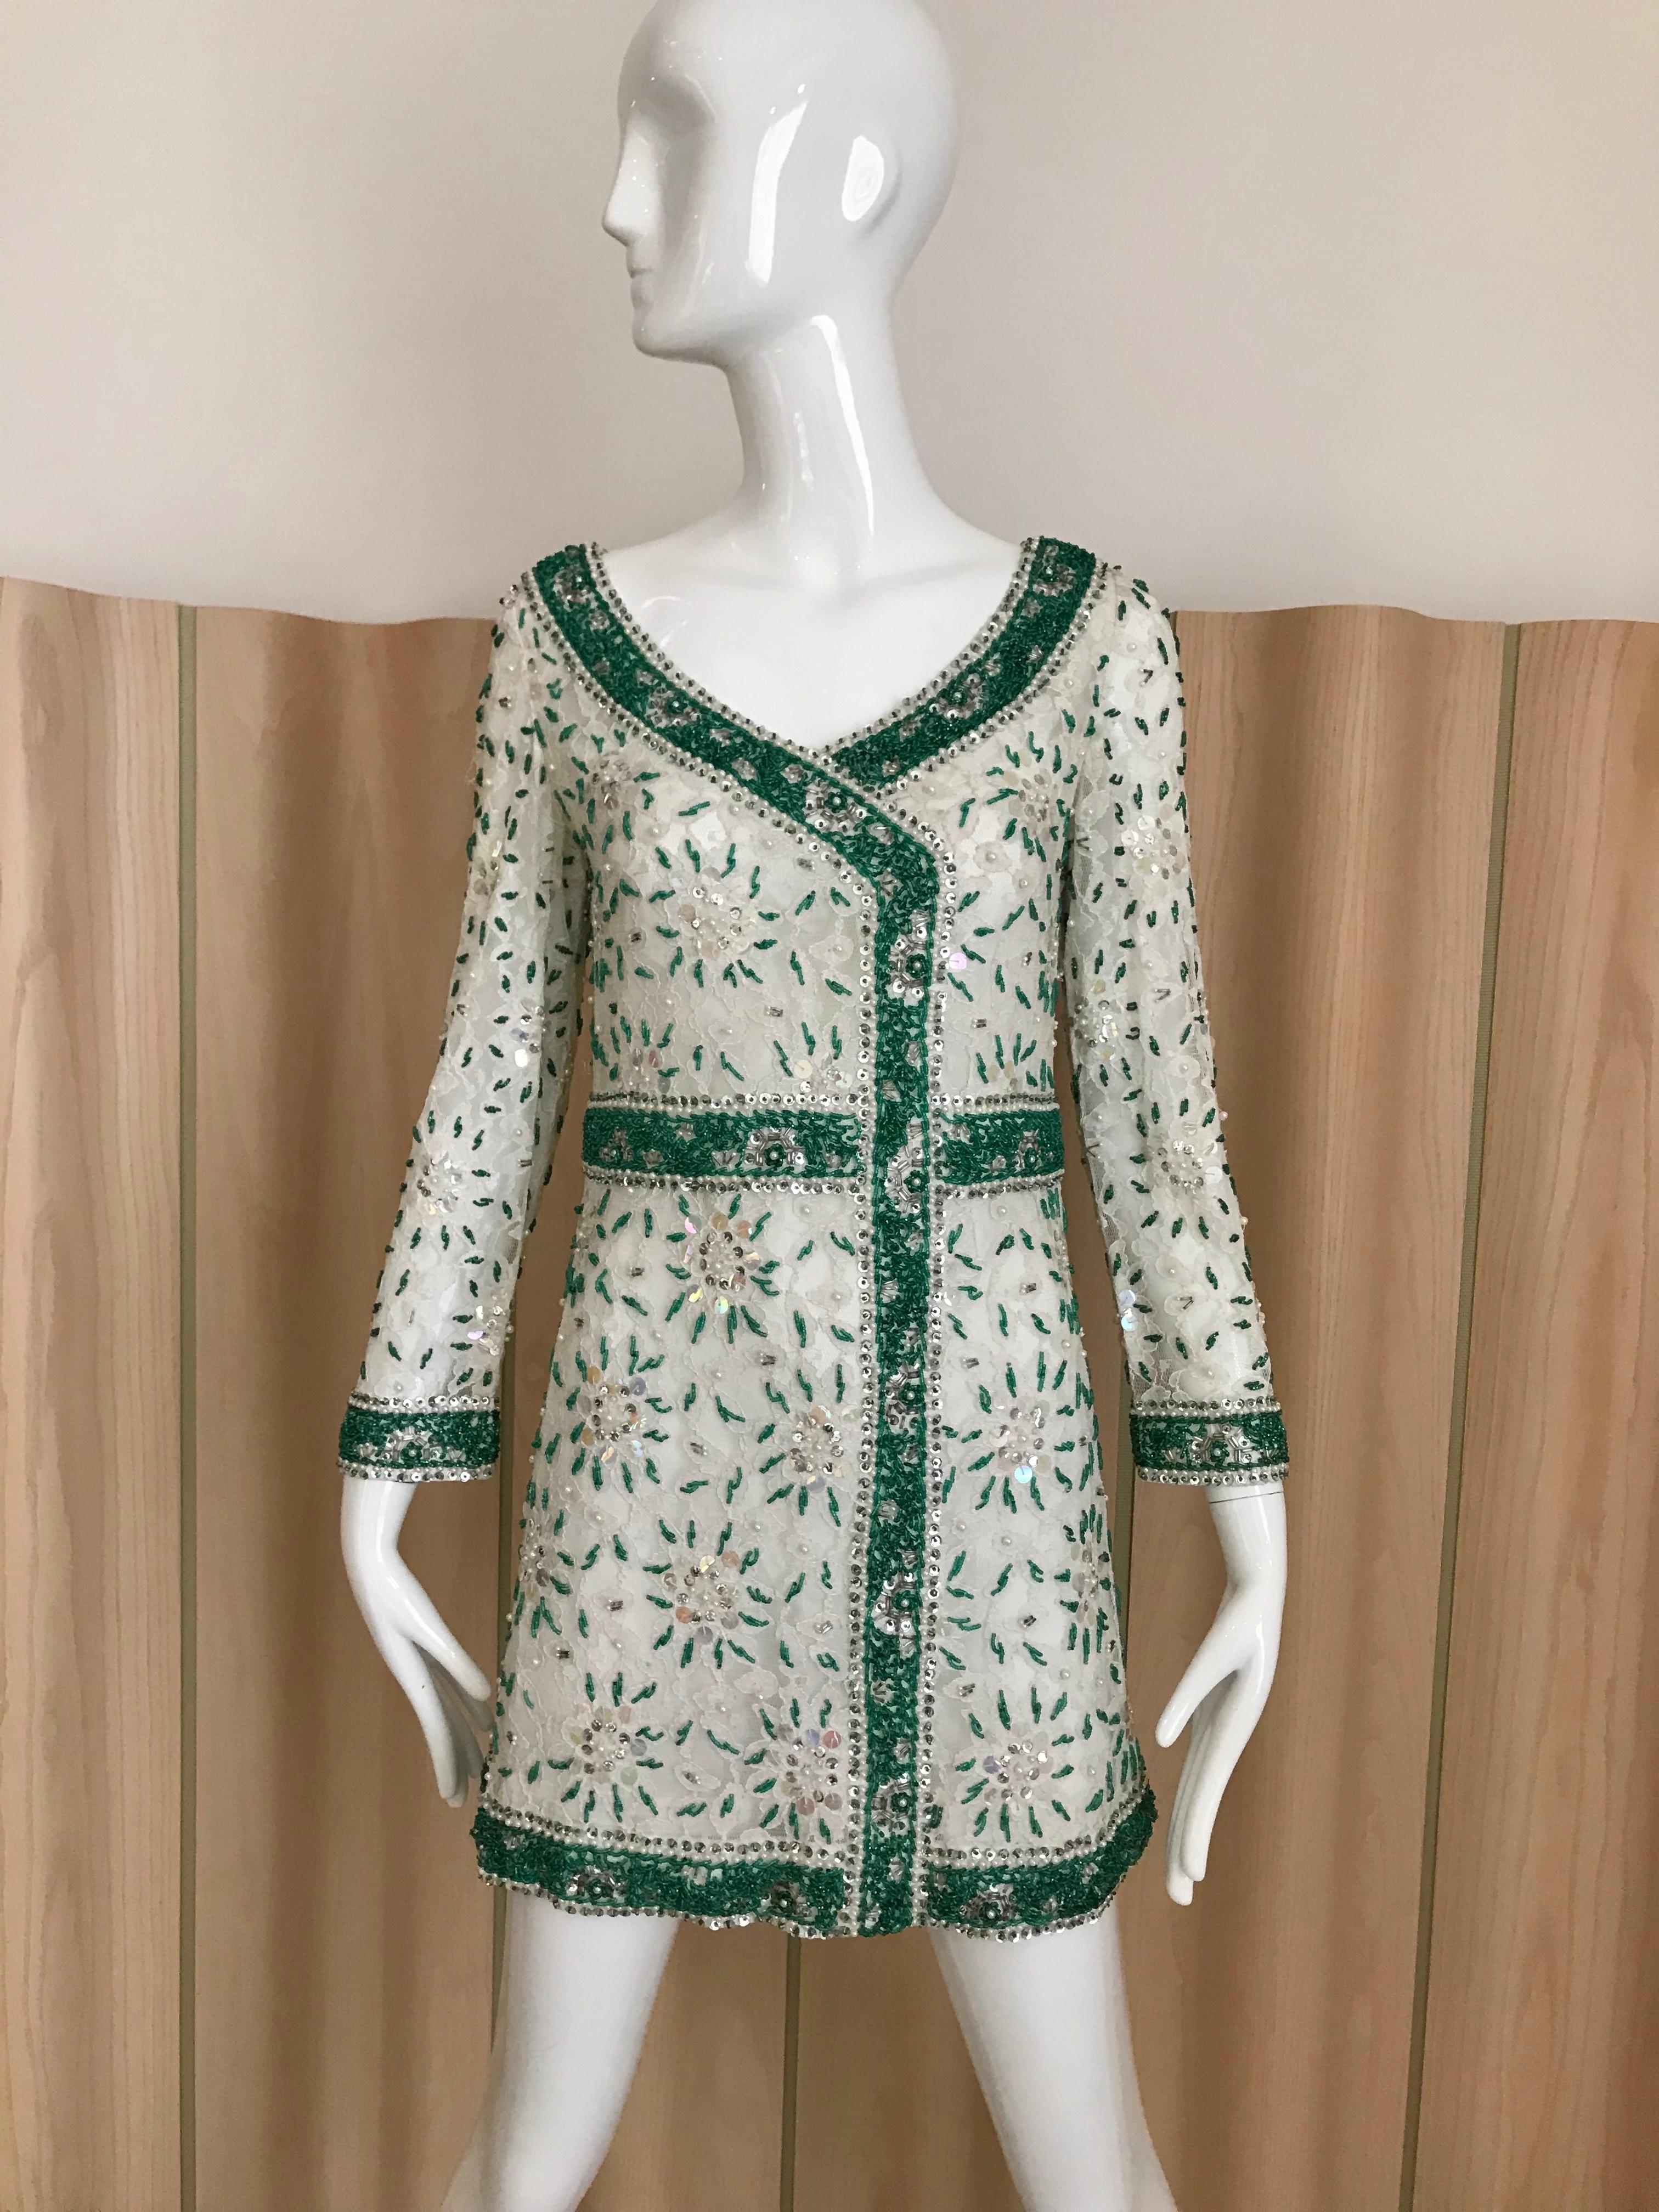 Vintage 1960s Intricate White and Green beaded sequin floral pattern on white lace mini cocktail dress.
Dress is lined in silk but sleeve in unlined.
Size: best fit size 0/2 or 4 
Bust: 34 inches / Waist: 28 inches/ Hip: 34.5 inches / total length :